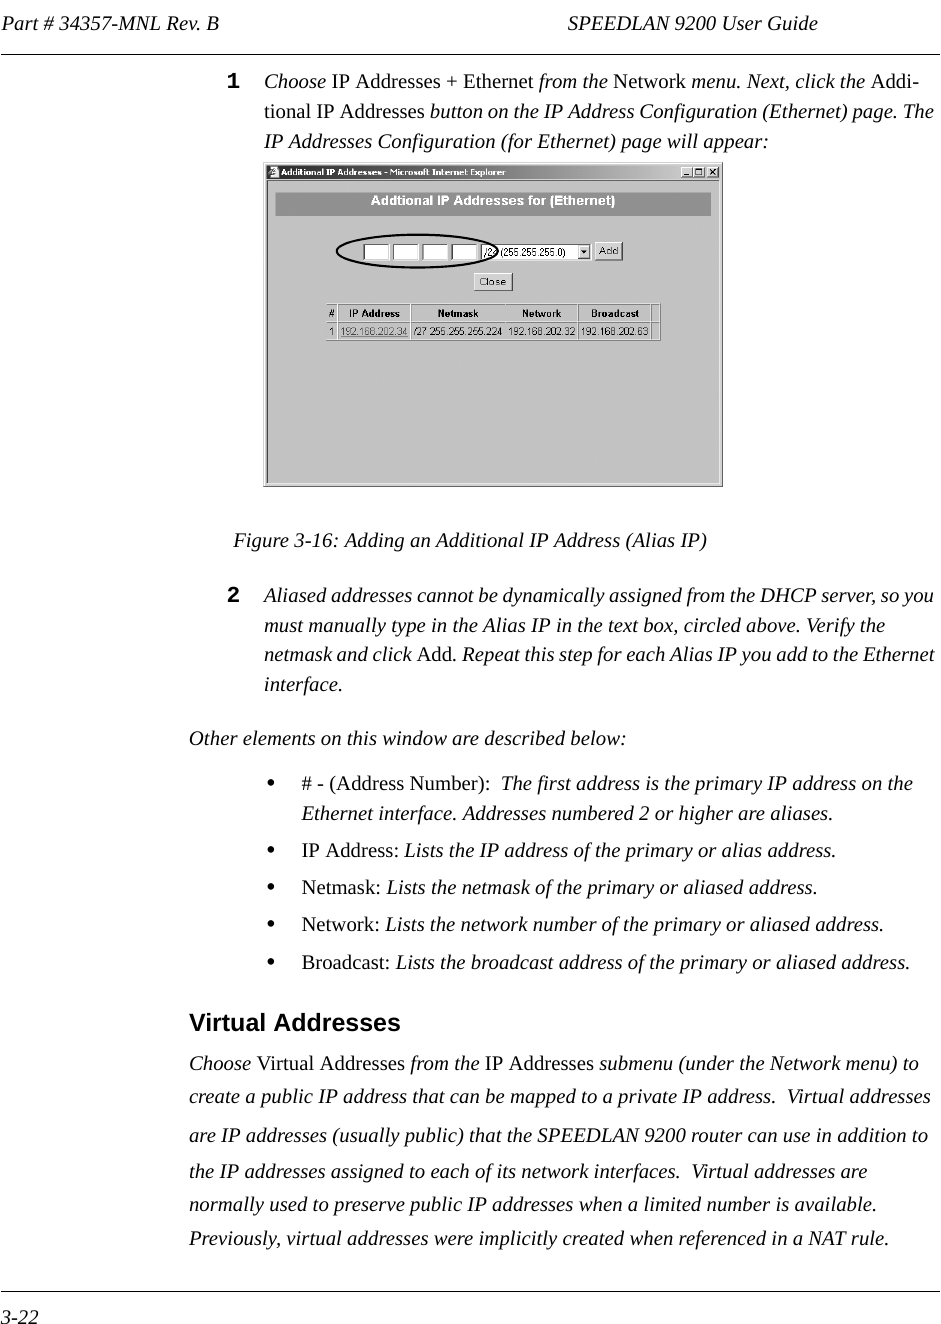 Part # 34357-MNL Rev. B                                                                   SPEEDLAN 9200 User Guide 3-221Choose IP Addresses + Ethernet from the Network menu. Next, click the Addi-tional IP Addresses button on the IP Address Configuration (Ethernet) page. The IP Addresses Configuration (for Ethernet) page will appear:Figure 3-16: Adding an Additional IP Address (Alias IP)2Aliased addresses cannot be dynamically assigned from the DHCP server, so you must manually type in the Alias IP in the text box, circled above. Verify the netmask and click Add. Repeat this step for each Alias IP you add to the Ethernet interface. Other elements on this window are described below:•# - (Address Number):  The first address is the primary IP address on the Ethernet interface. Addresses numbered 2 or higher are aliases. •IP Address: Lists the IP address of the primary or alias address.•Netmask: Lists the netmask of the primary or aliased address.•Network: Lists the network number of the primary or aliased address.•Broadcast: Lists the broadcast address of the primary or aliased address.Virtual AddressesChoose Virtual Addresses from the IP Addresses submenu (under the Network menu) to create a public IP address that can be mapped to a private IP address.  Virtual addresses are IP addresses (usually public) that the SPEEDLAN 9200 router can use in addition to the IP addresses assigned to each of its network interfaces.  Virtual addresses are normally used to preserve public IP addresses when a limited number is available.  Previously, virtual addresses were implicitly created when referenced in a NAT rule.  